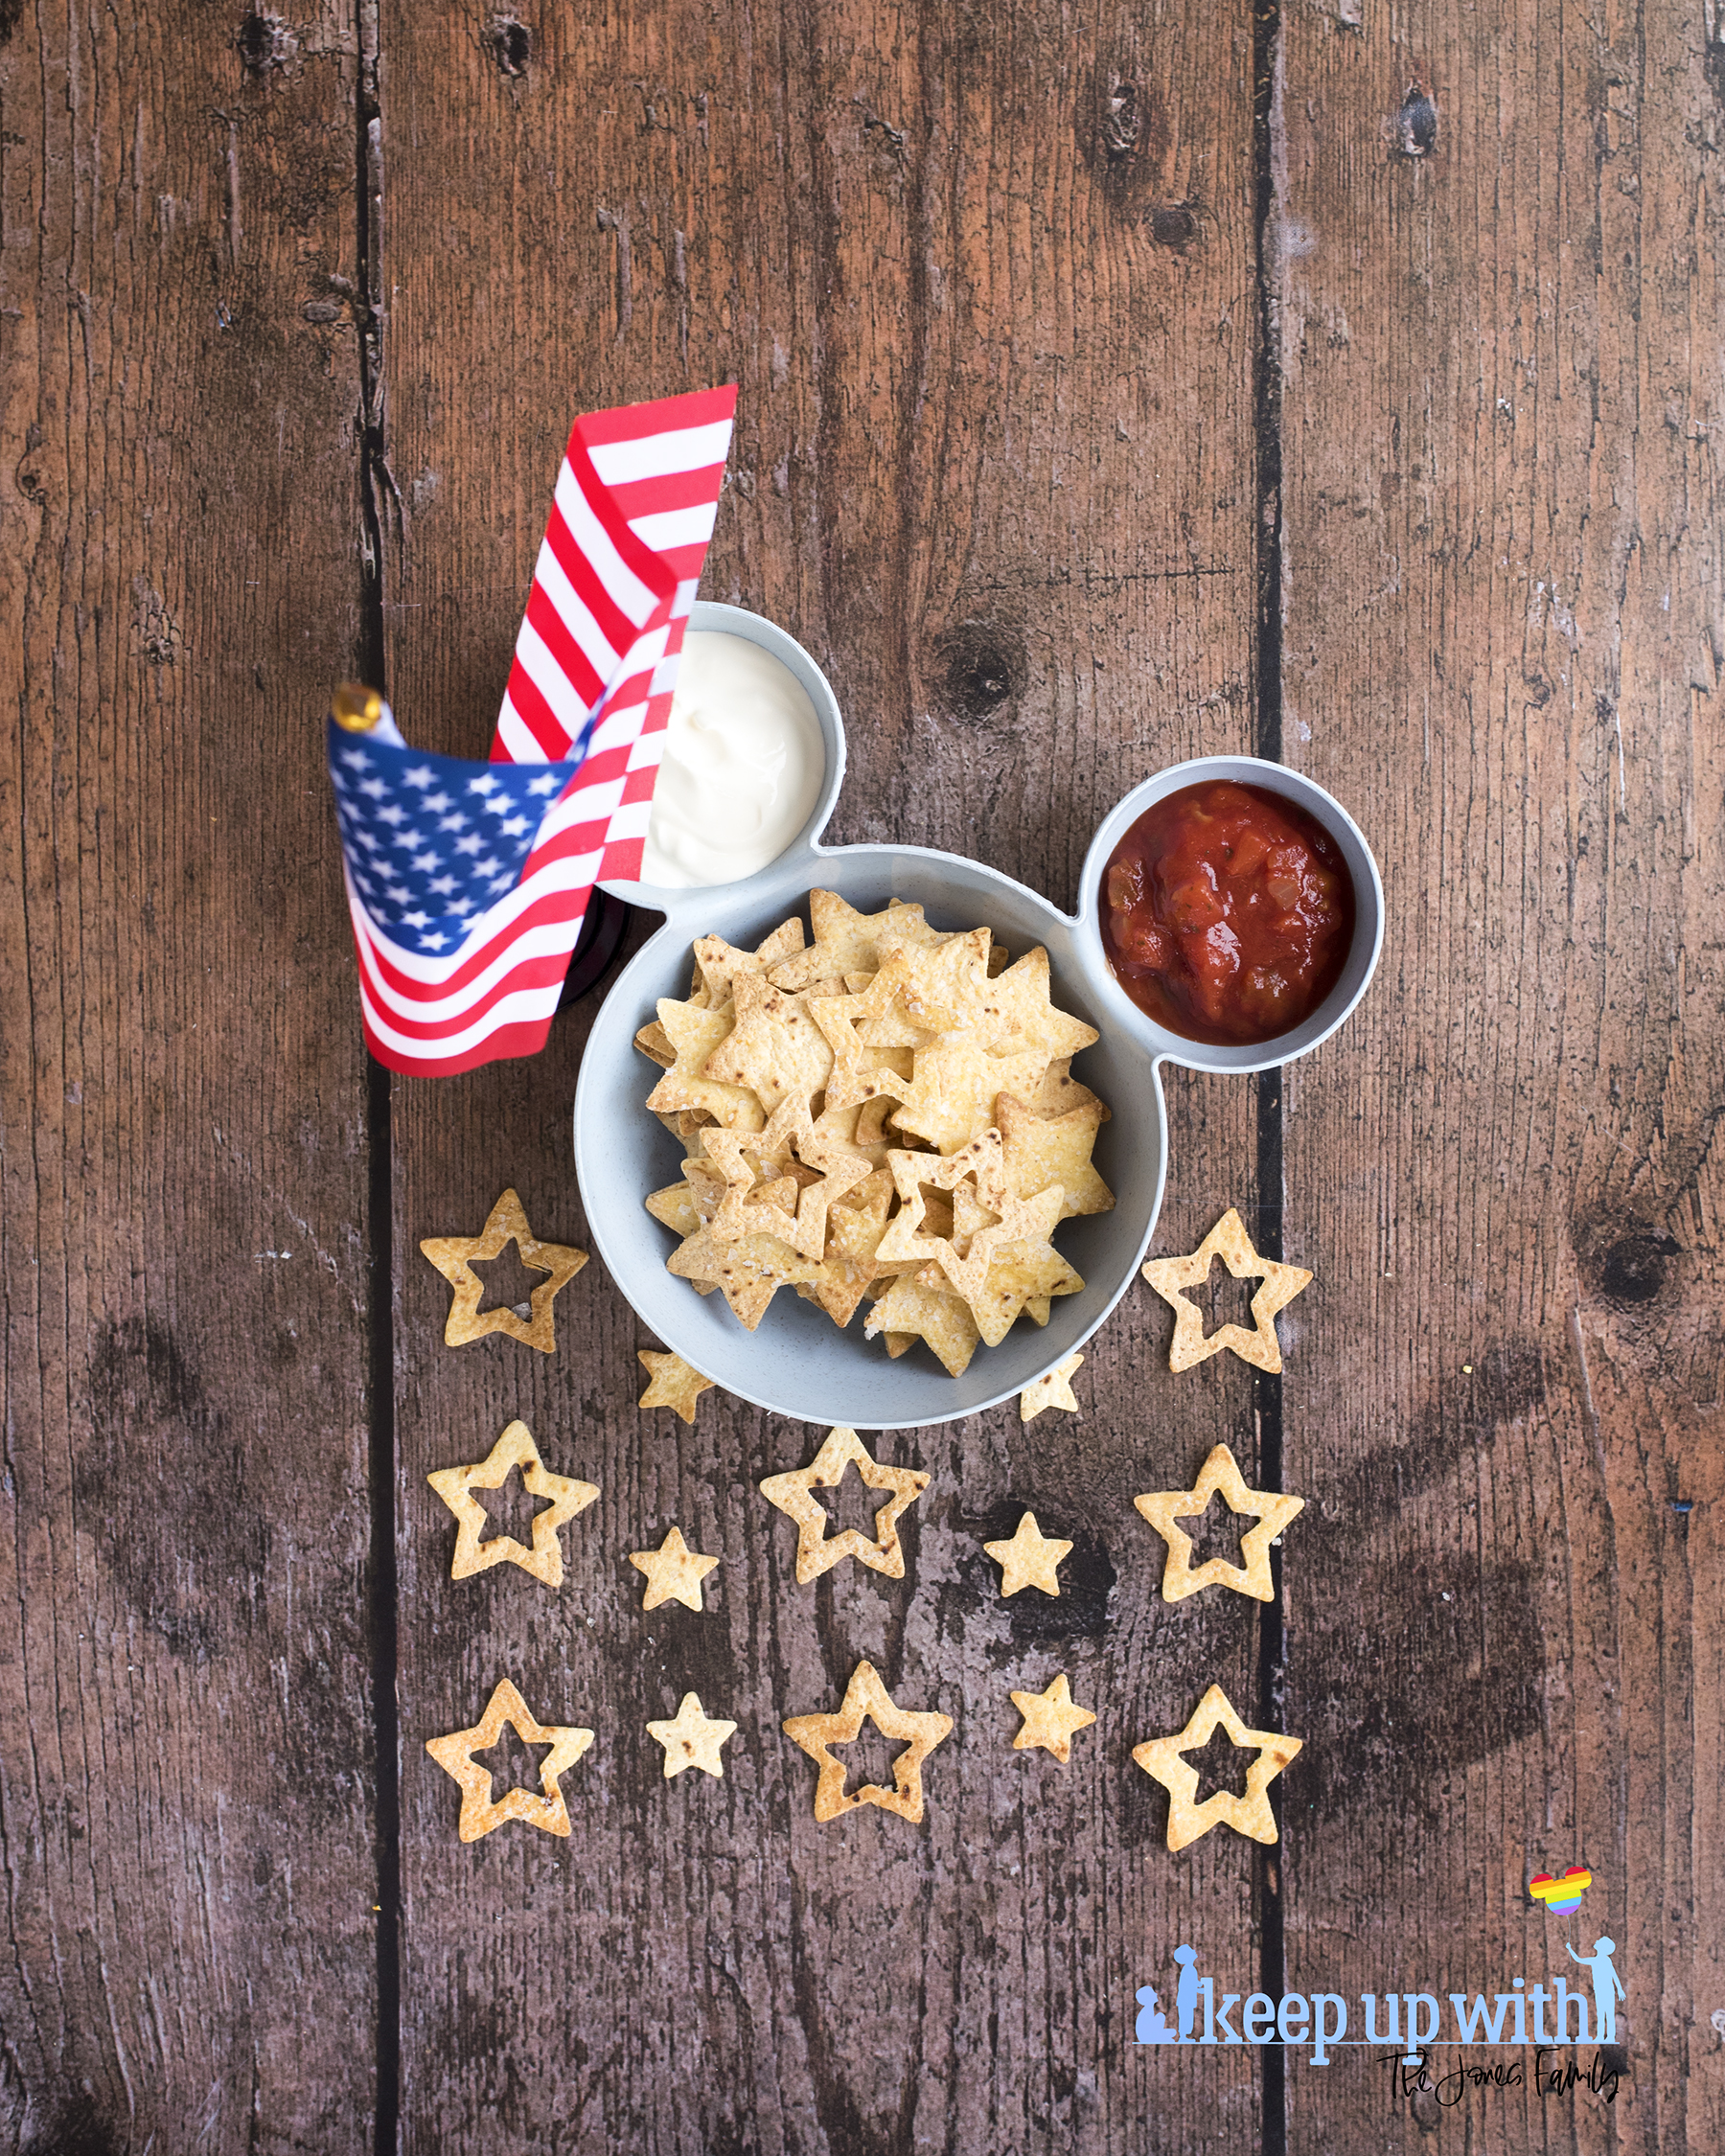 Image shows a blue bowl in the shape of Mickey Mouse suitable for chips and dip. There is an American flag stood close to the bowl and inside the bowl is tomato salsa, soured cream, and star spangled nacho chips. Image by keep up with the jones family.